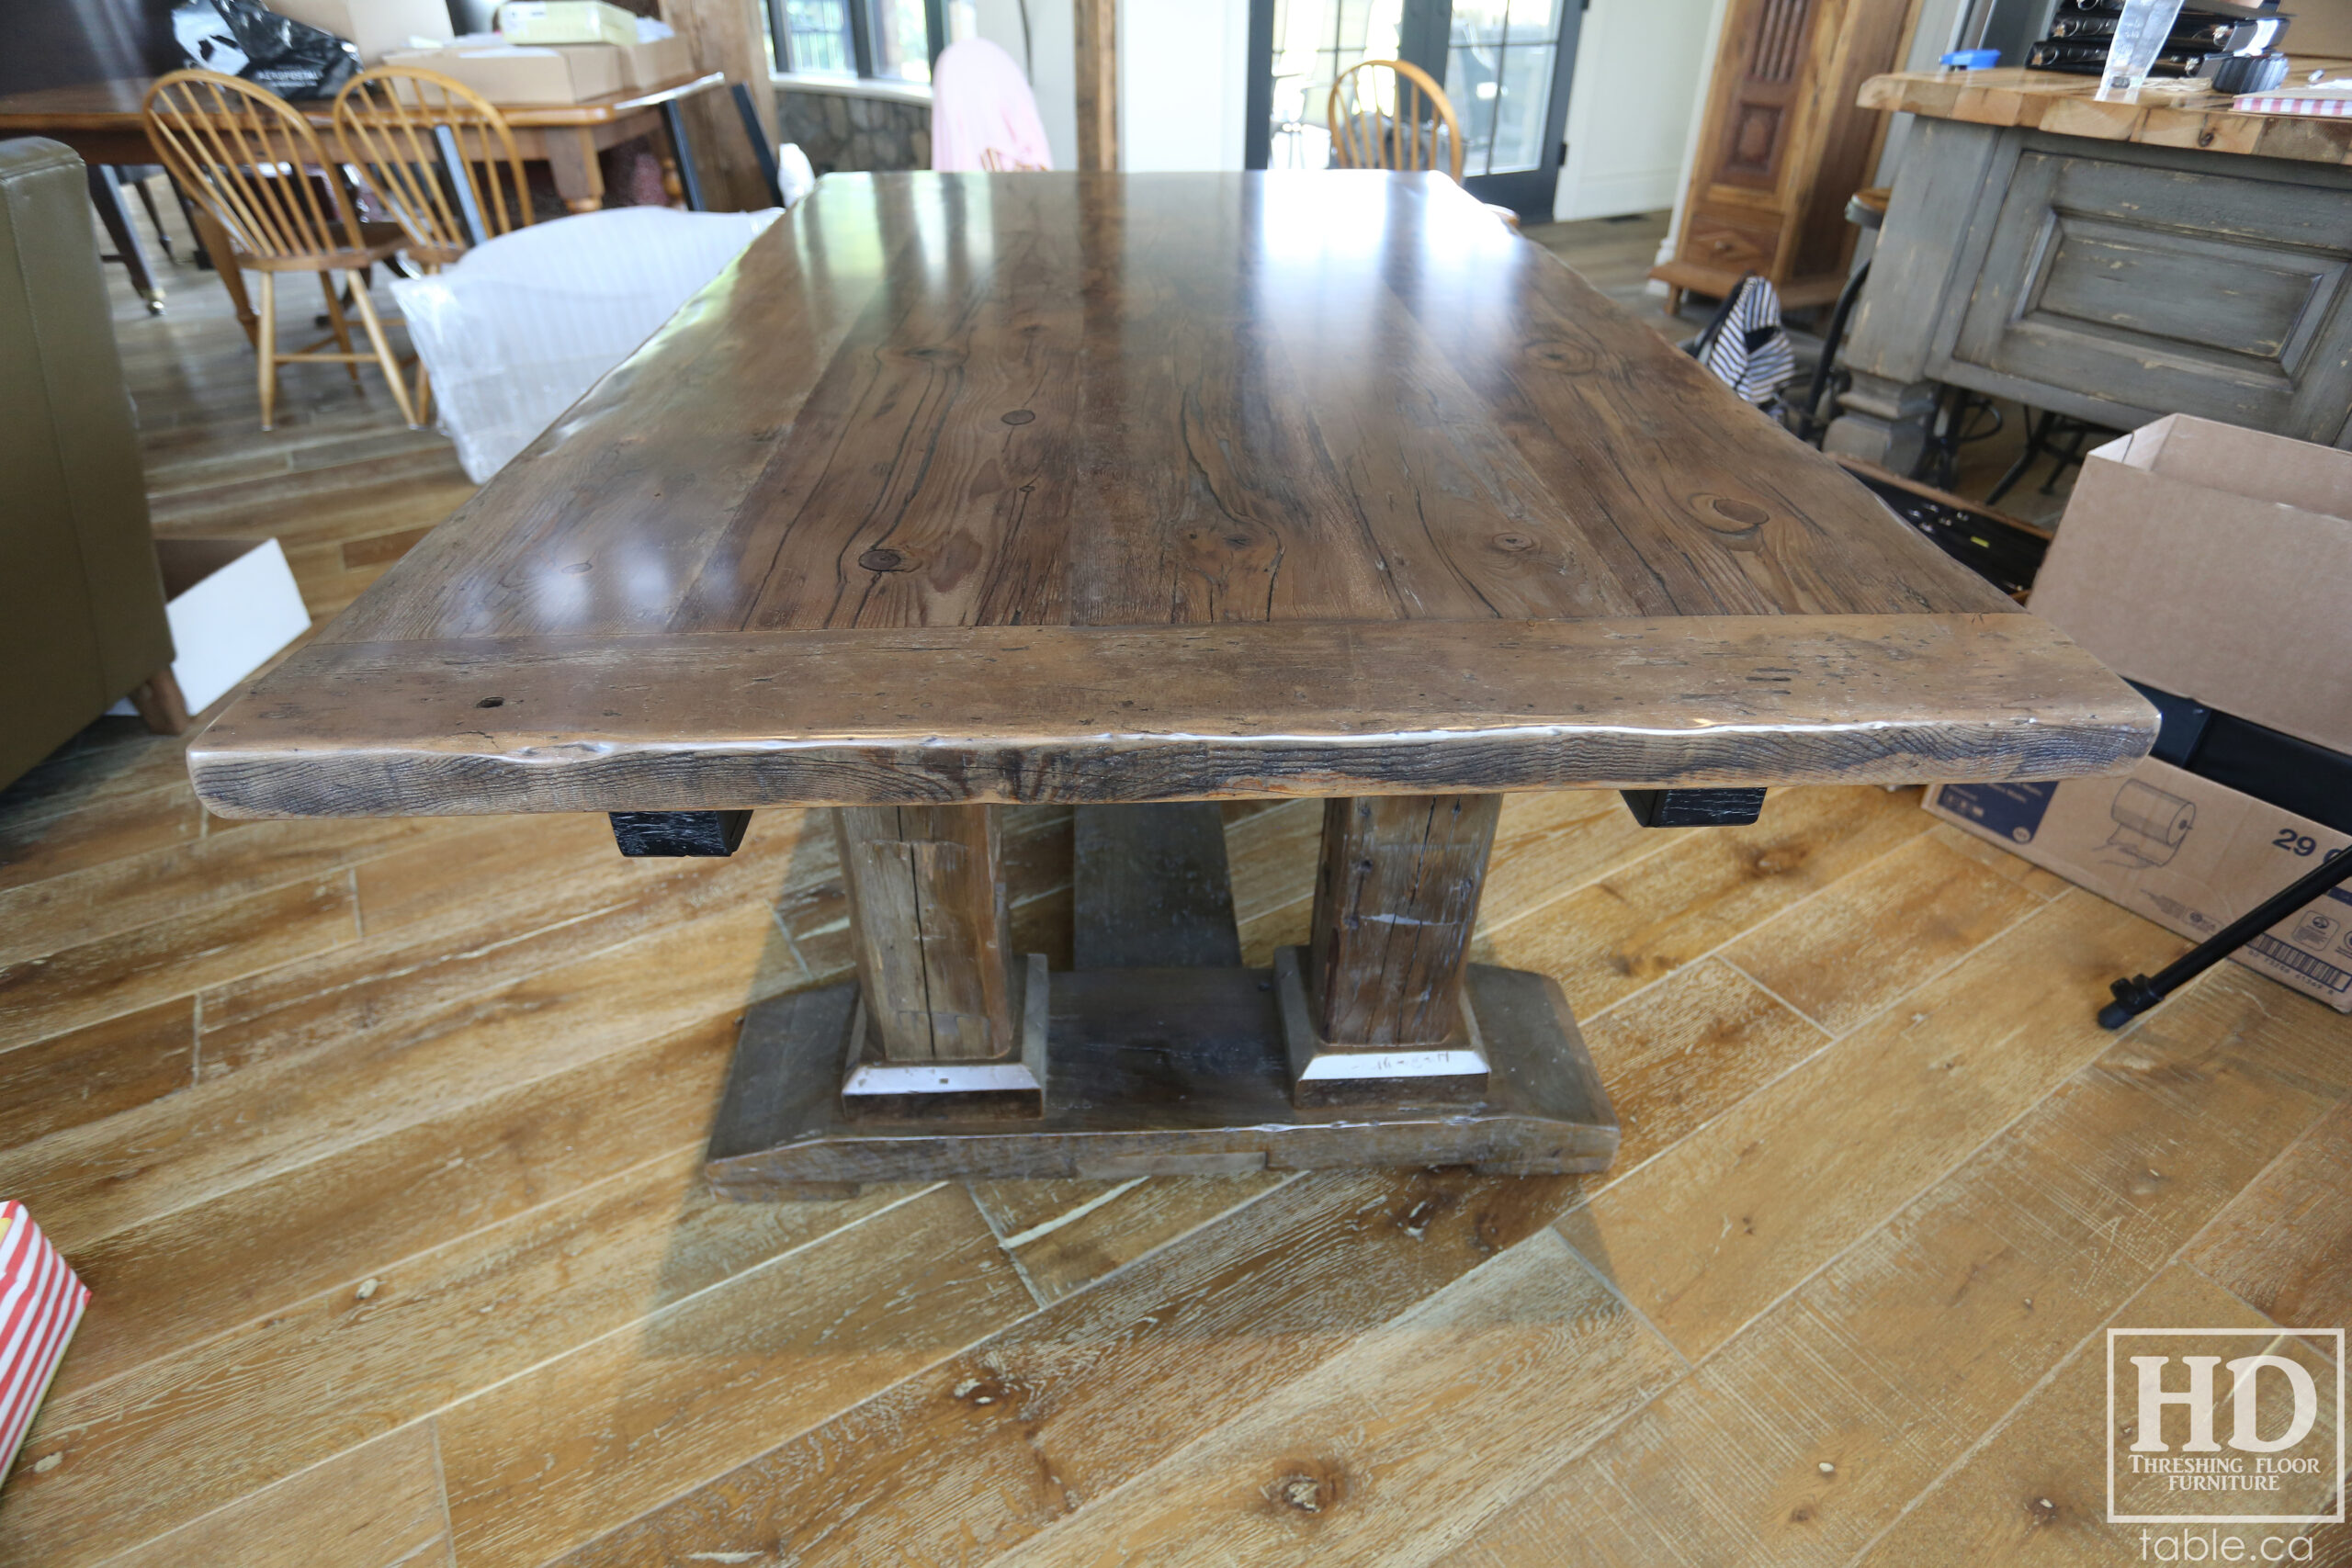 Barnboard Grey Option Reclaimed Wood Table with Modified Frame Base by HD Threshing Floor Furniture / www.table.ca